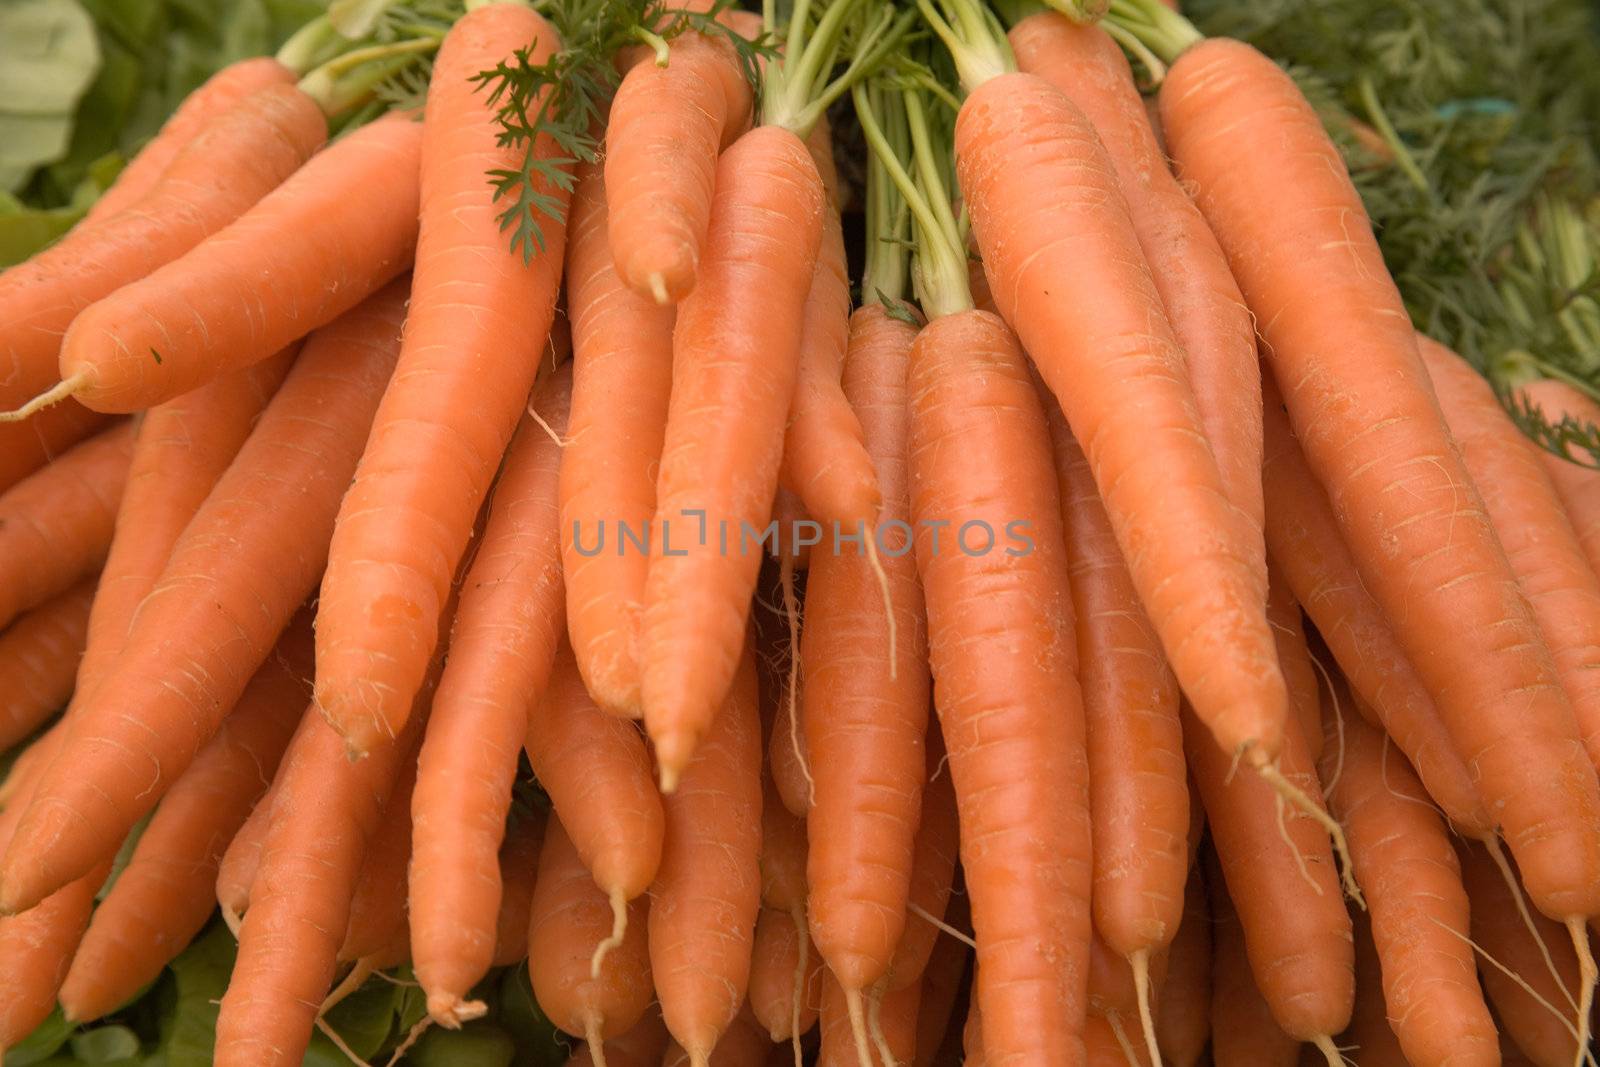 Fresh and ripe bunch of orange carrots on market stall.